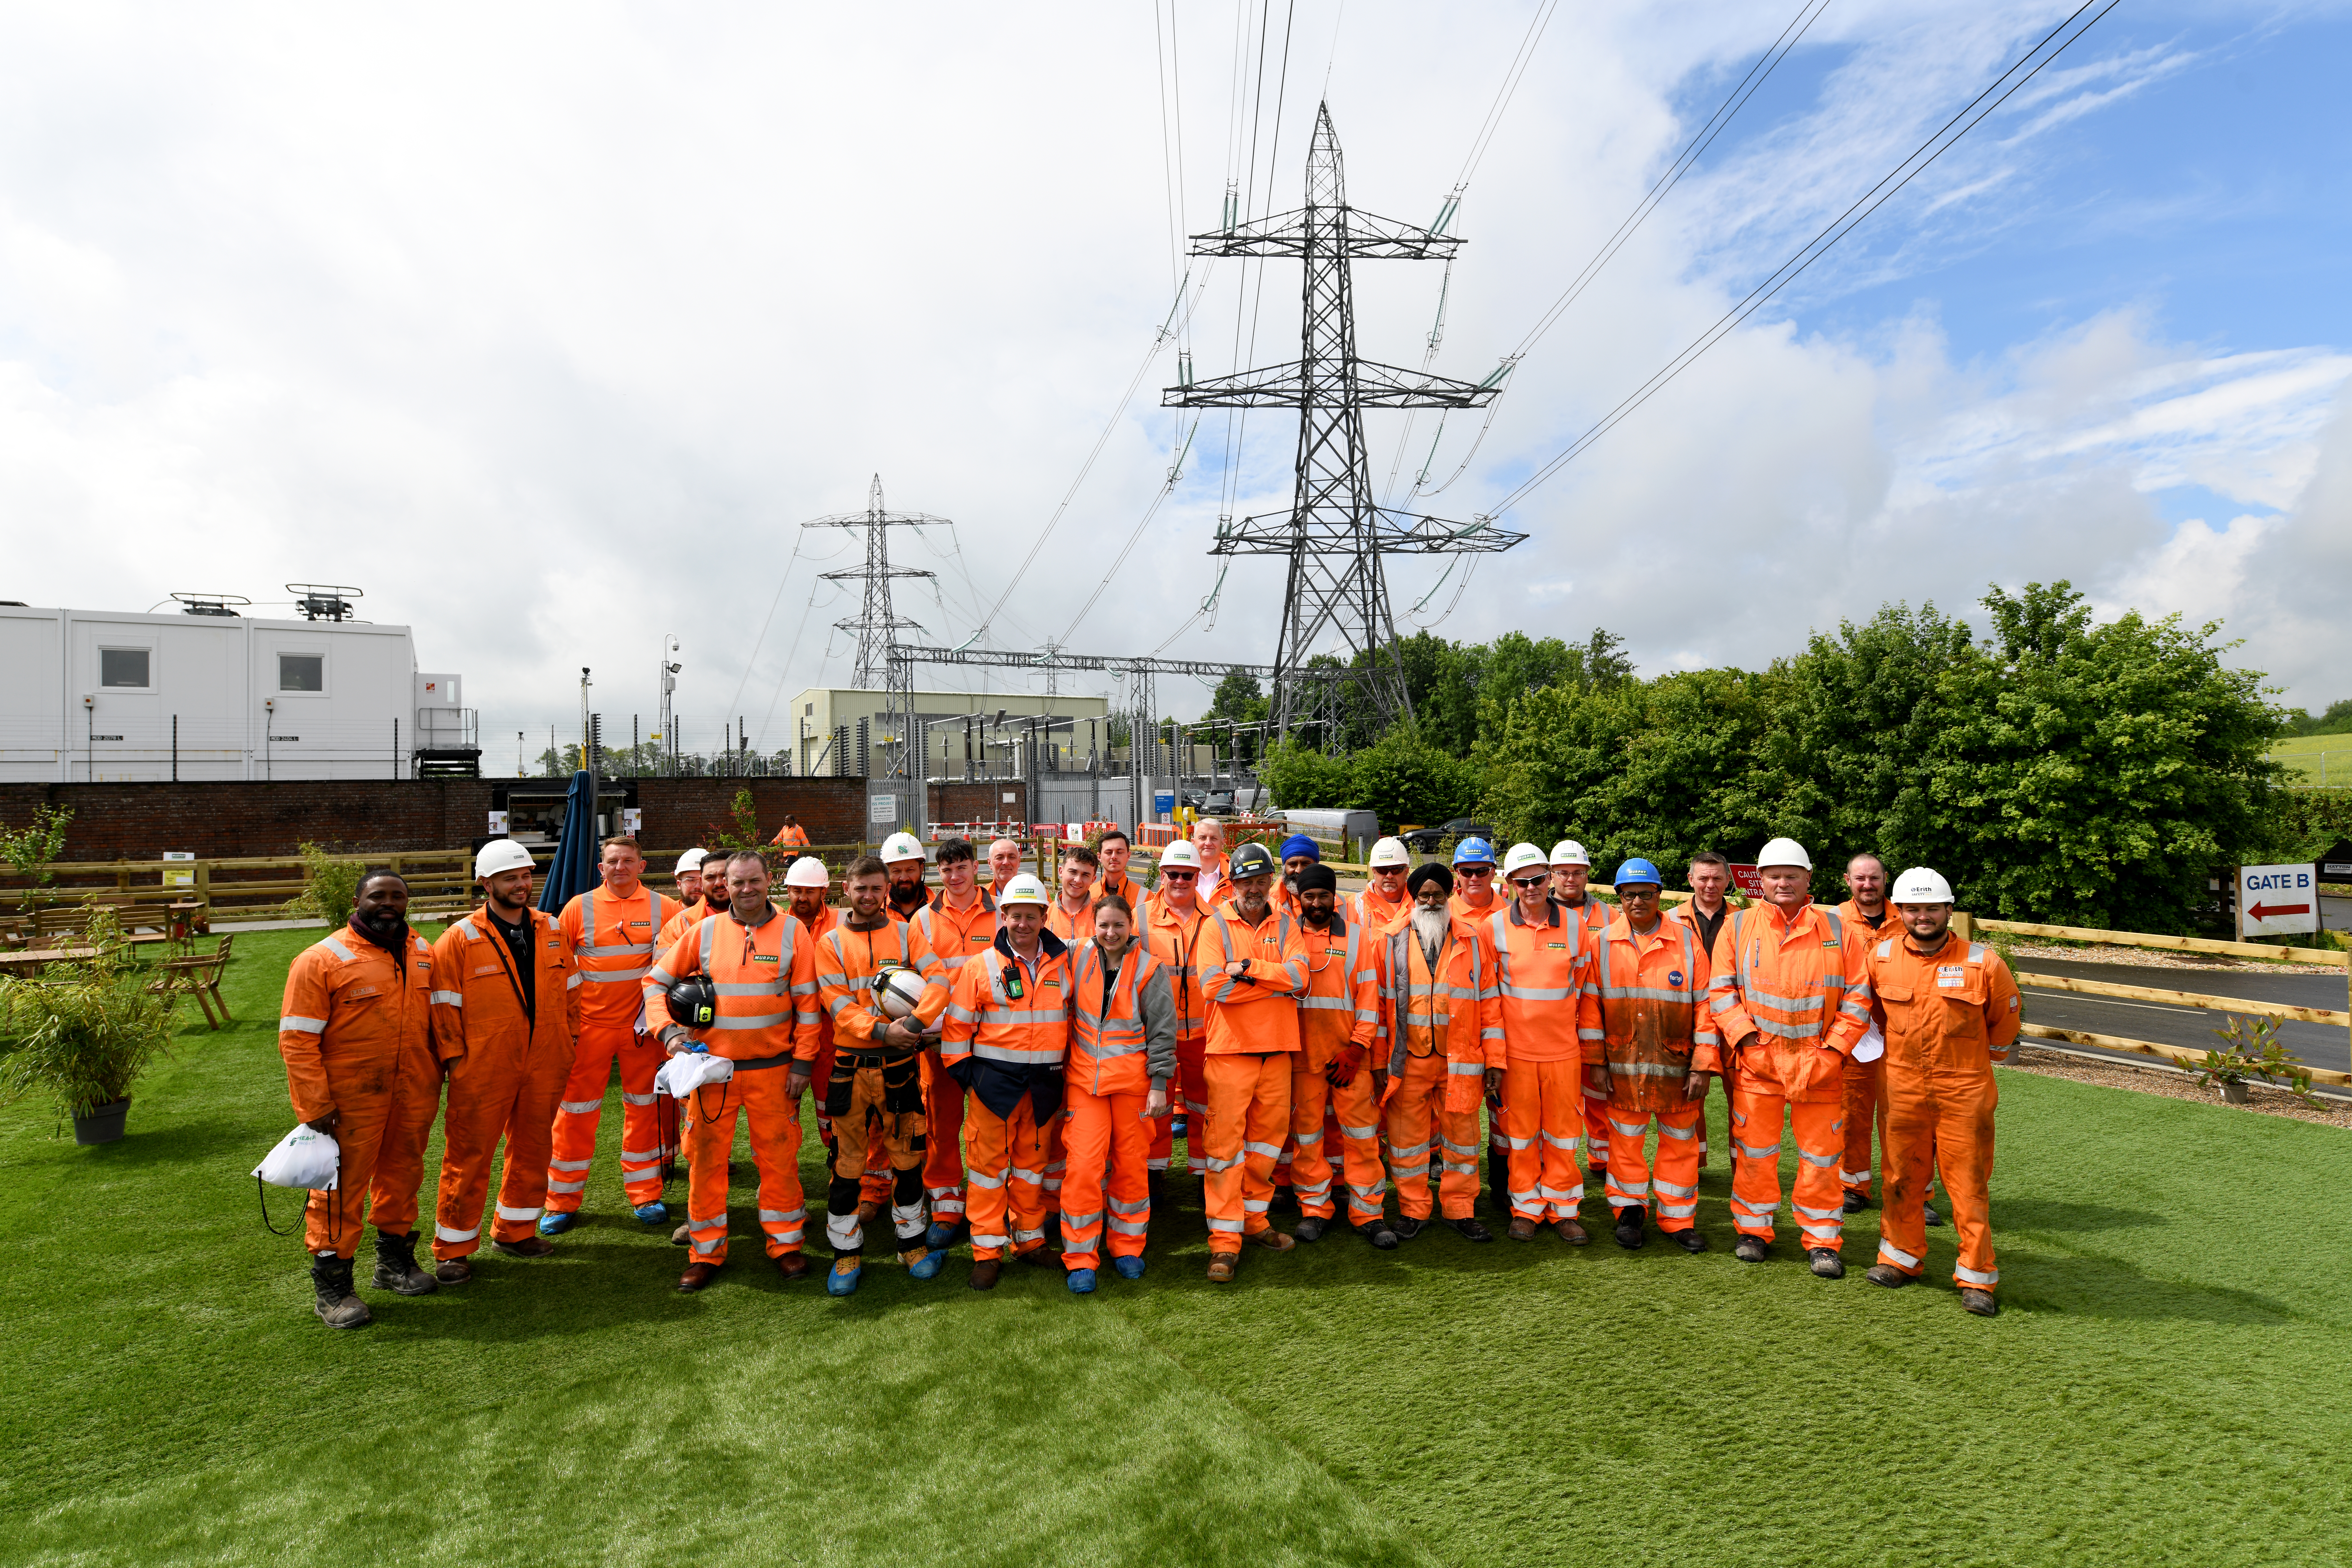 National Grid's construction health hub team wearing orange overalls in a green field with pylons in the background